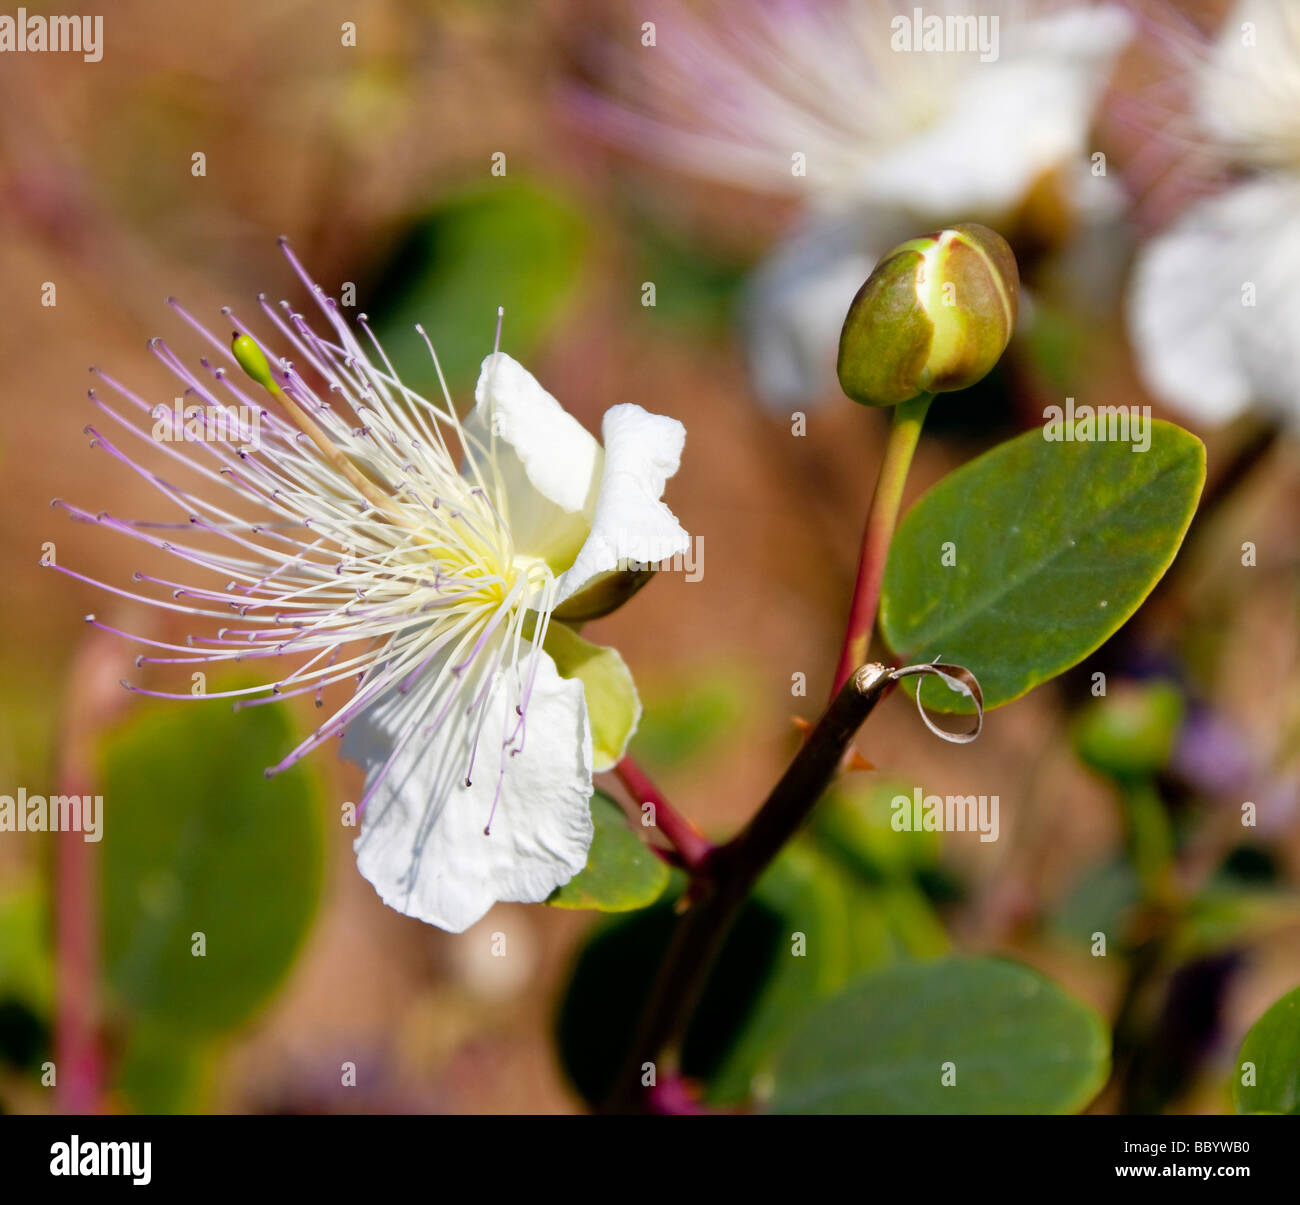 Flower and bud of the caper plant (Capparis spinosa), Mediterranean region, Cyprus, Europe Stock Photo